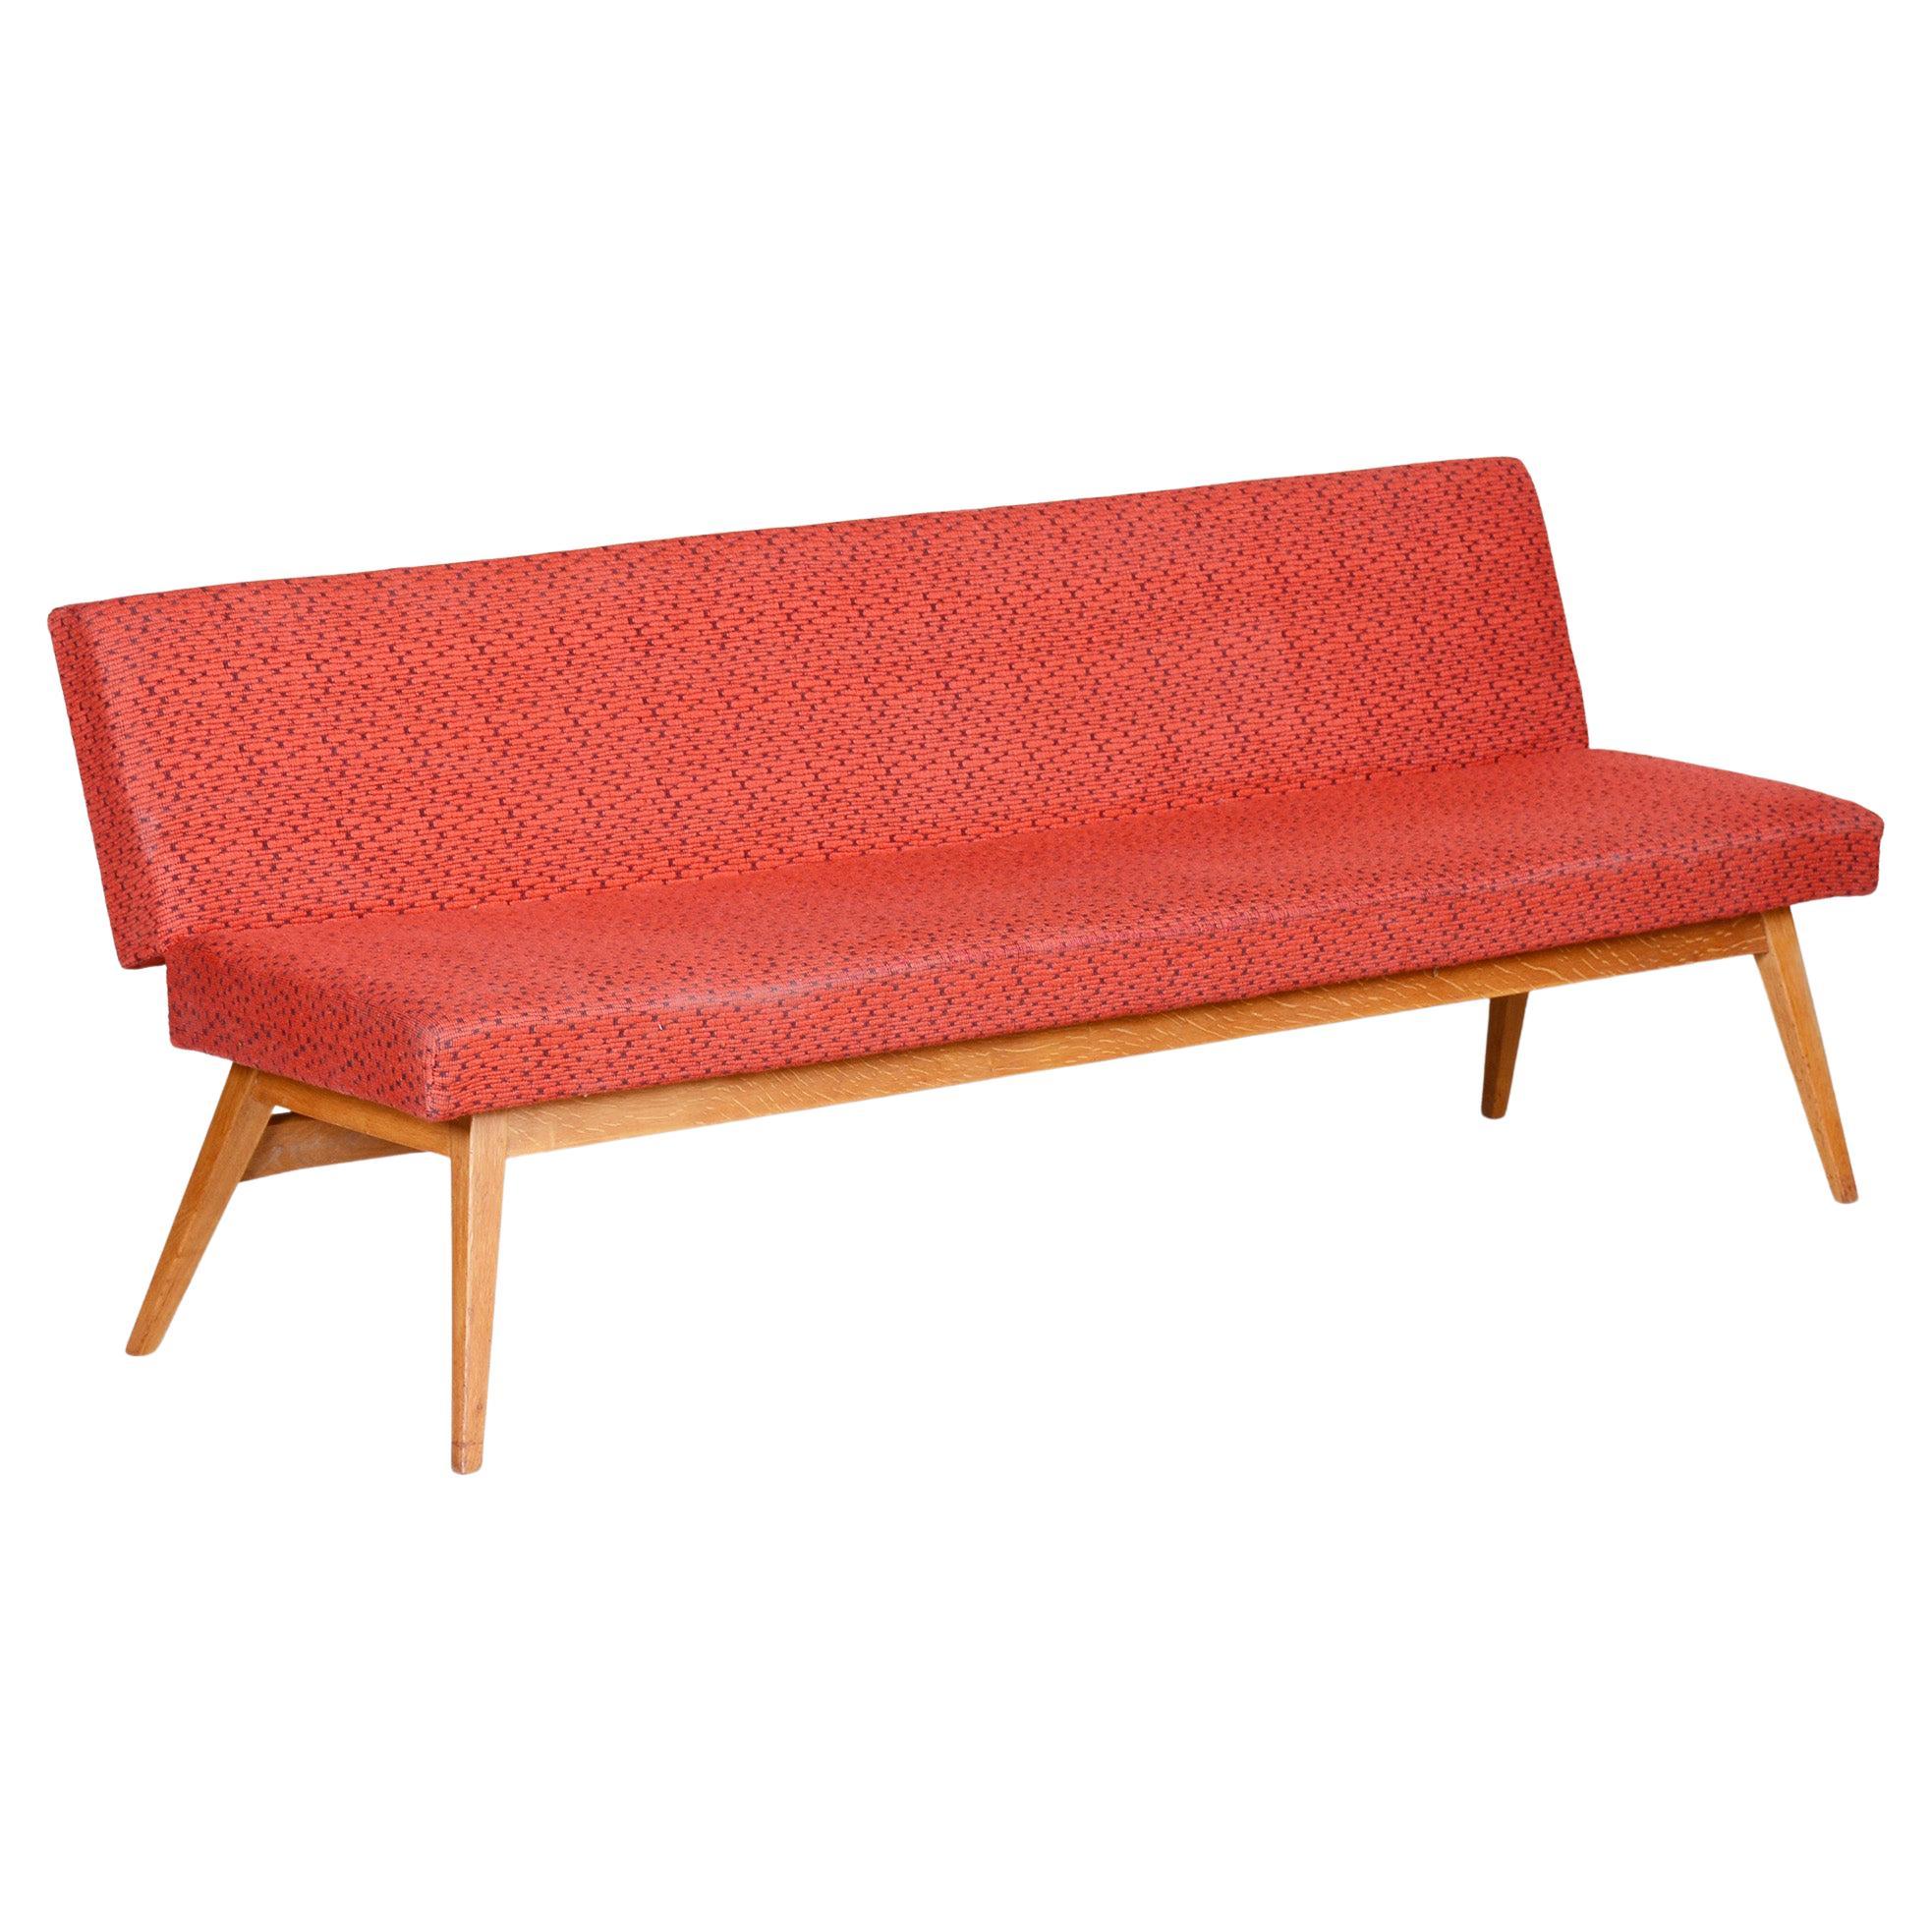 Red Midcentury Modern Oak Sofa, 1950s, Original well preserved upholstery For Sale